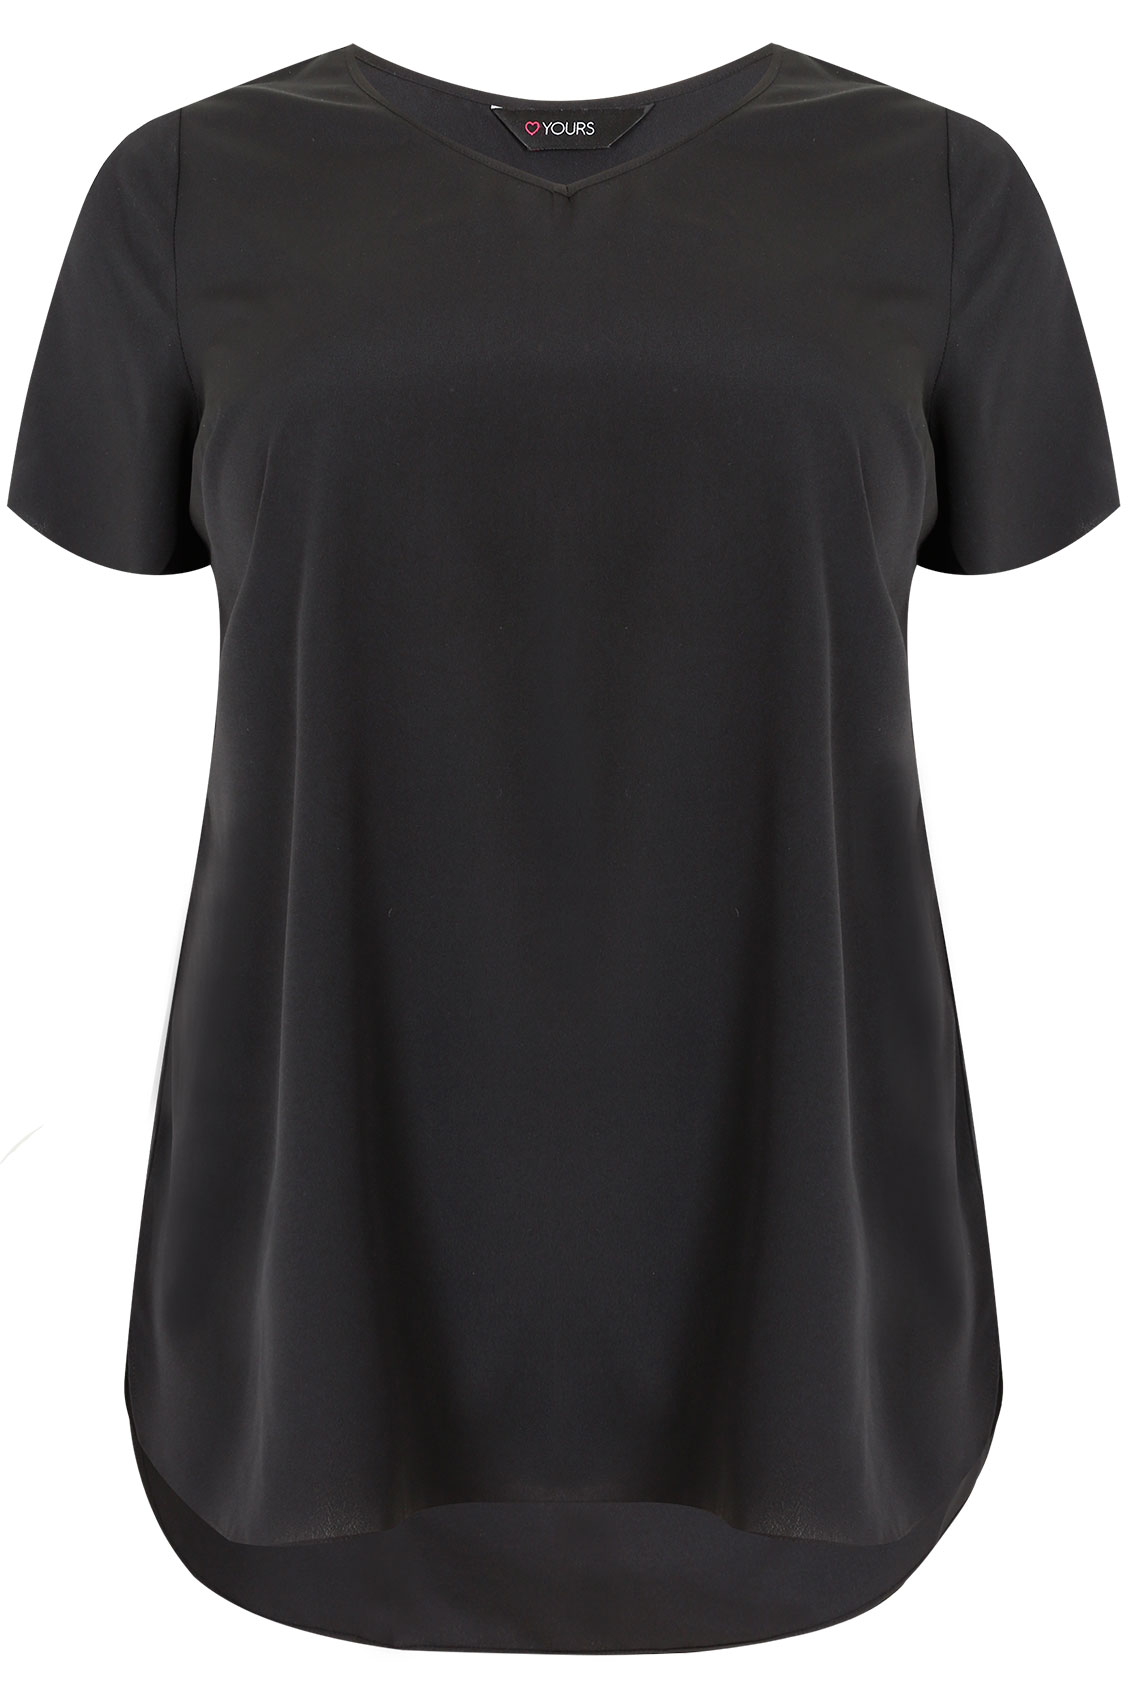 Black Woven Top With V Neck And Curved Hem Plus Size 16 To 36